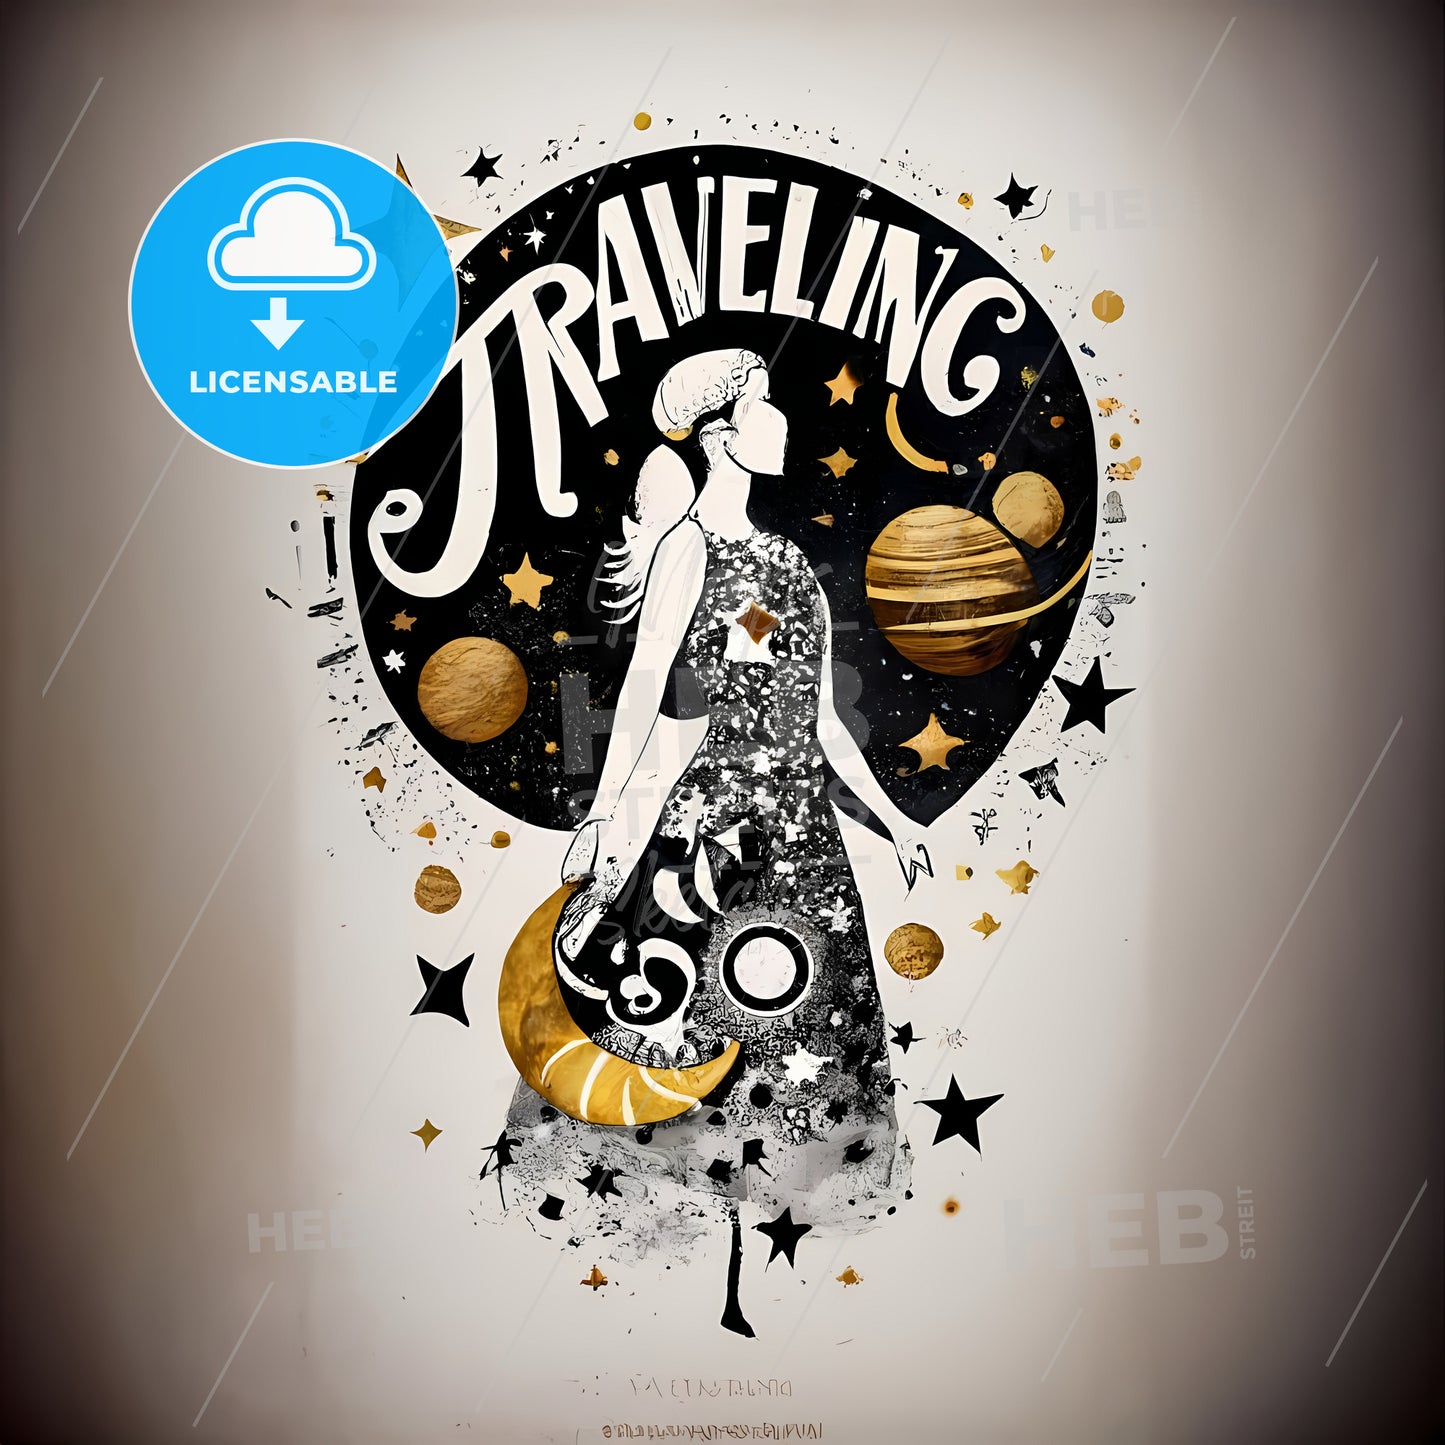 Traveling - A Graphic Of A Woman In A Dress